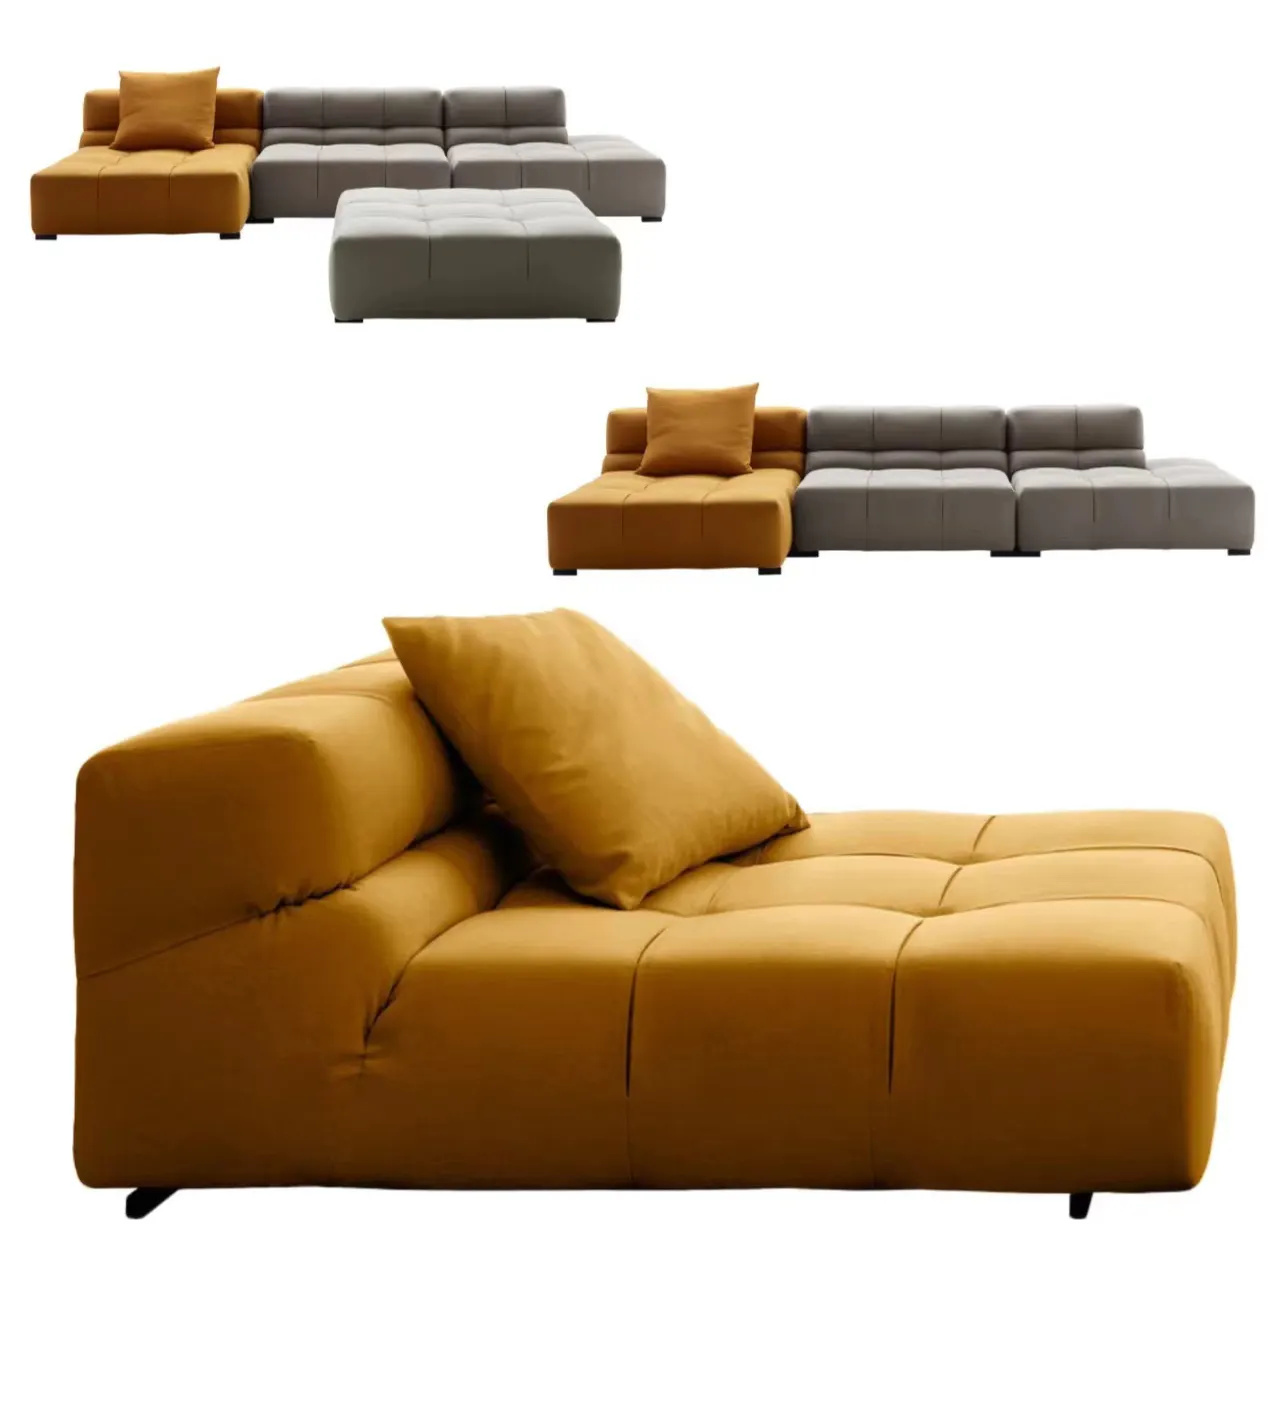 Modernes Wohnzimmer Tufty Too <span class=keywords><strong>Patricia</strong></span> Urquiola Sofa